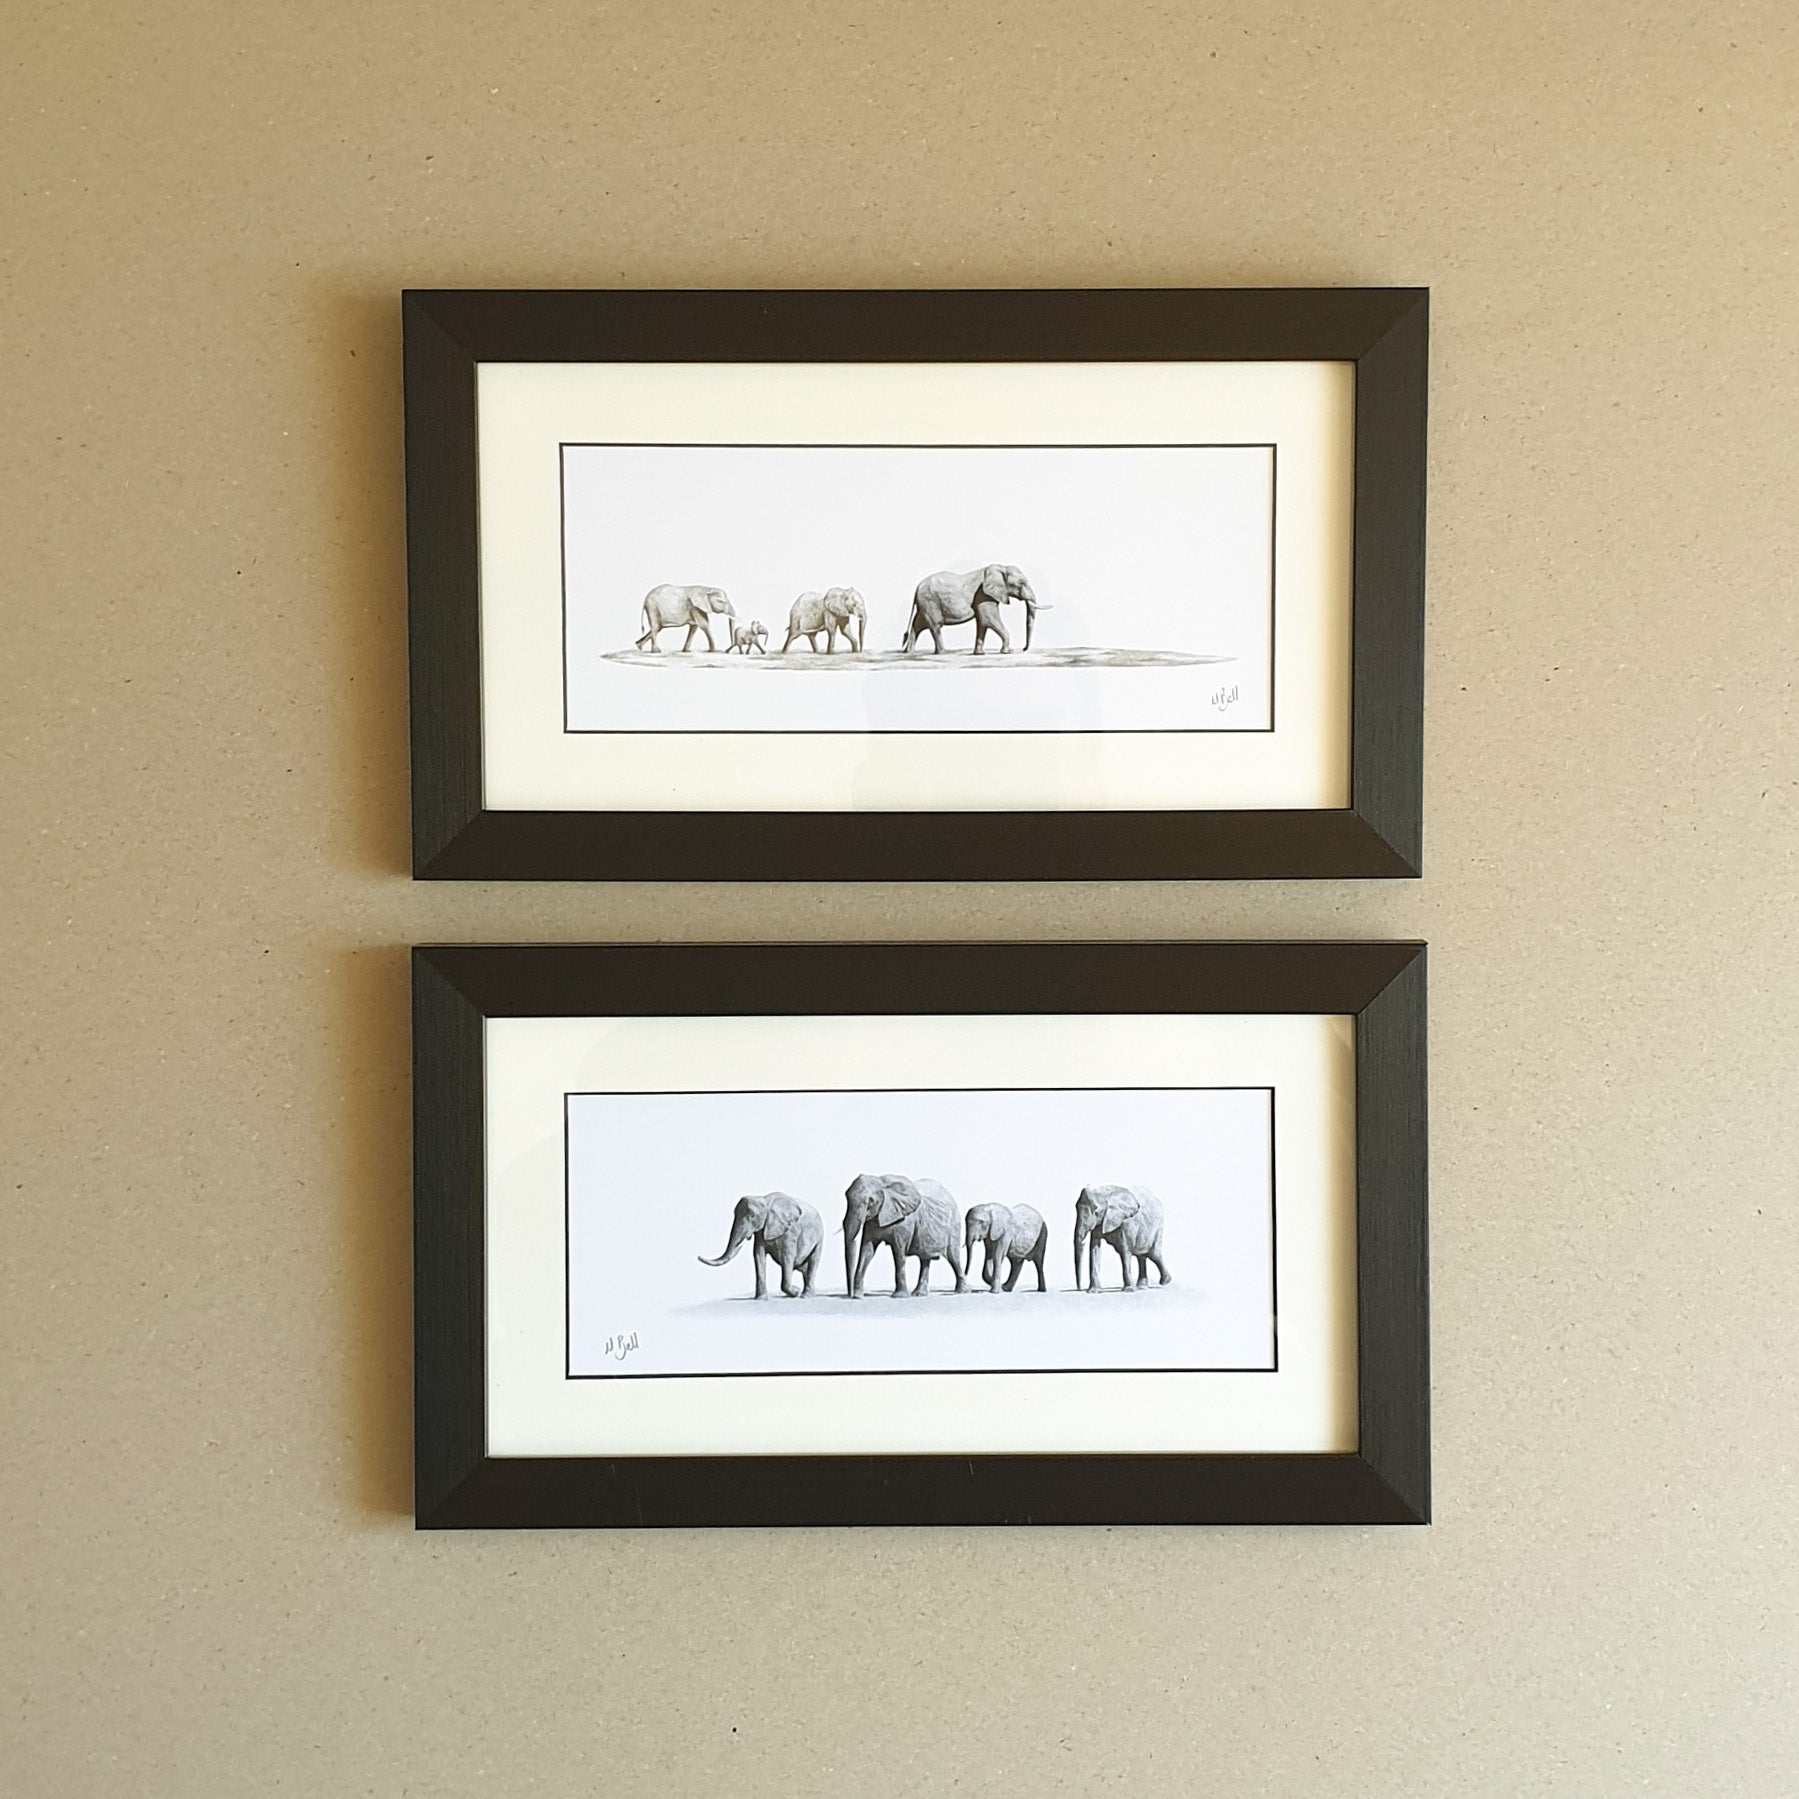 Elephant herd drawings with a frame by Matthew Bell